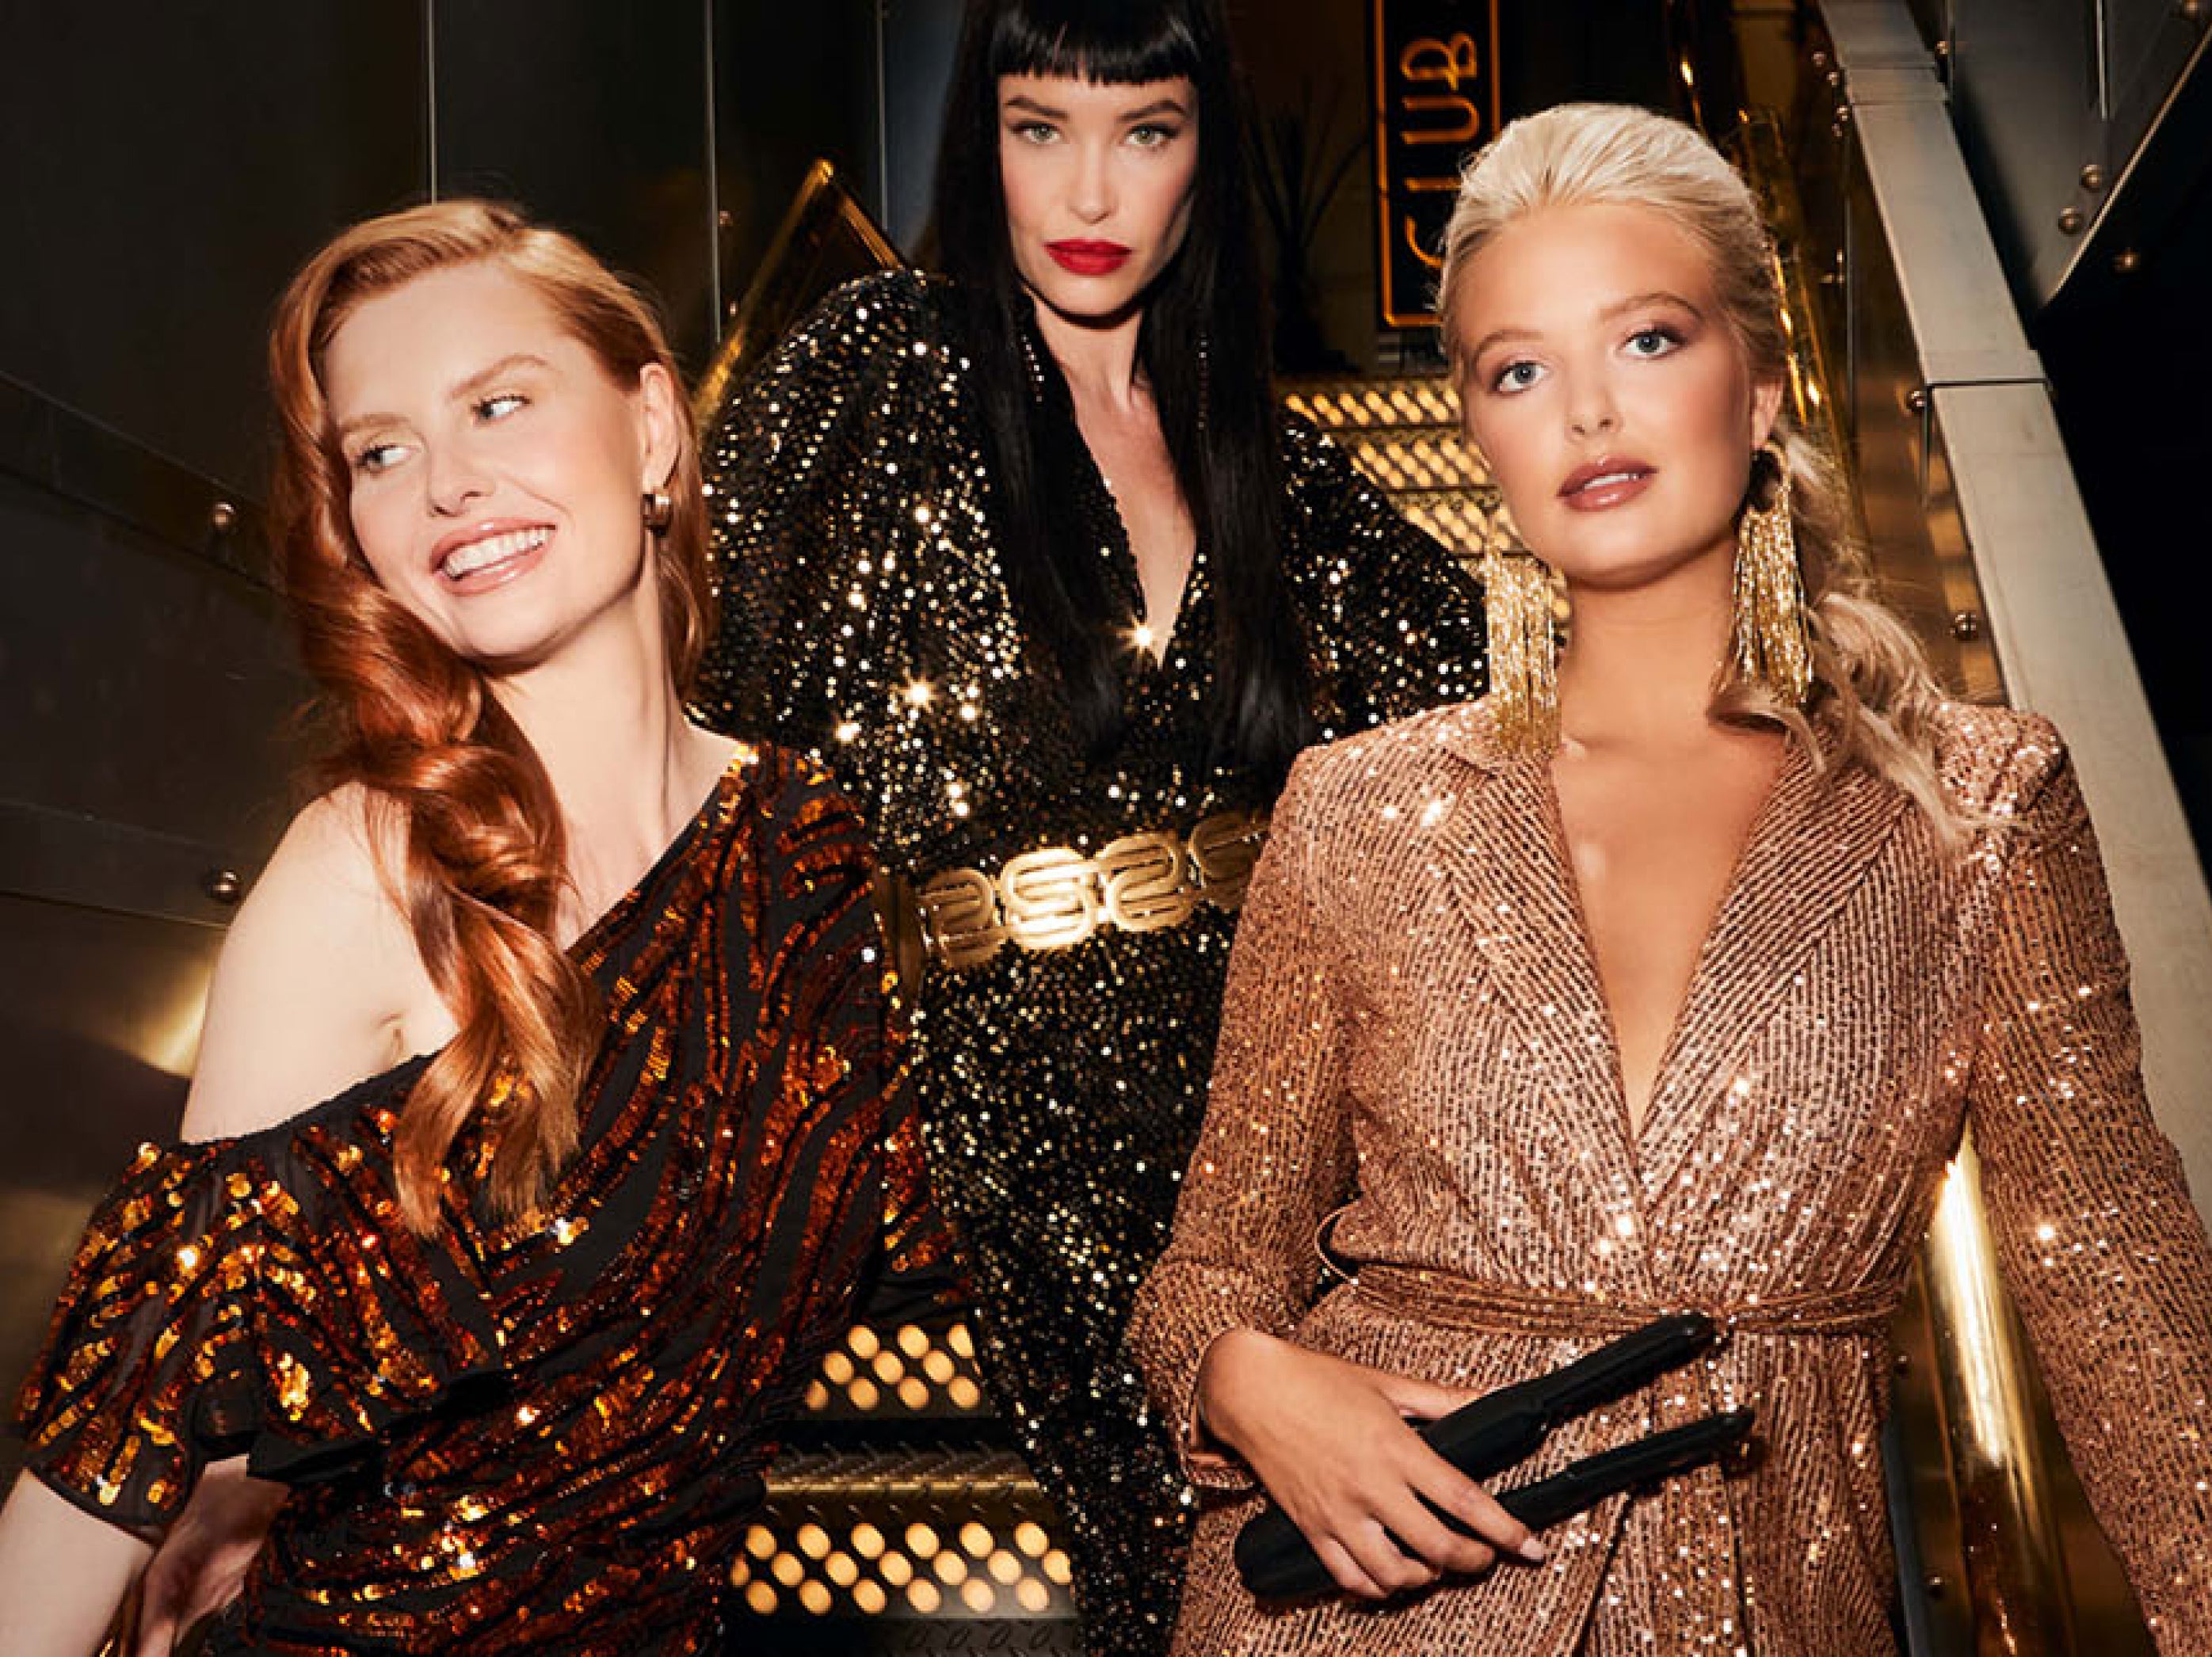 3 models, one with red hair, another with black hair and one with blonde hair, all wearing glittery outfits. The blonde model is holding The Cordless Iron.